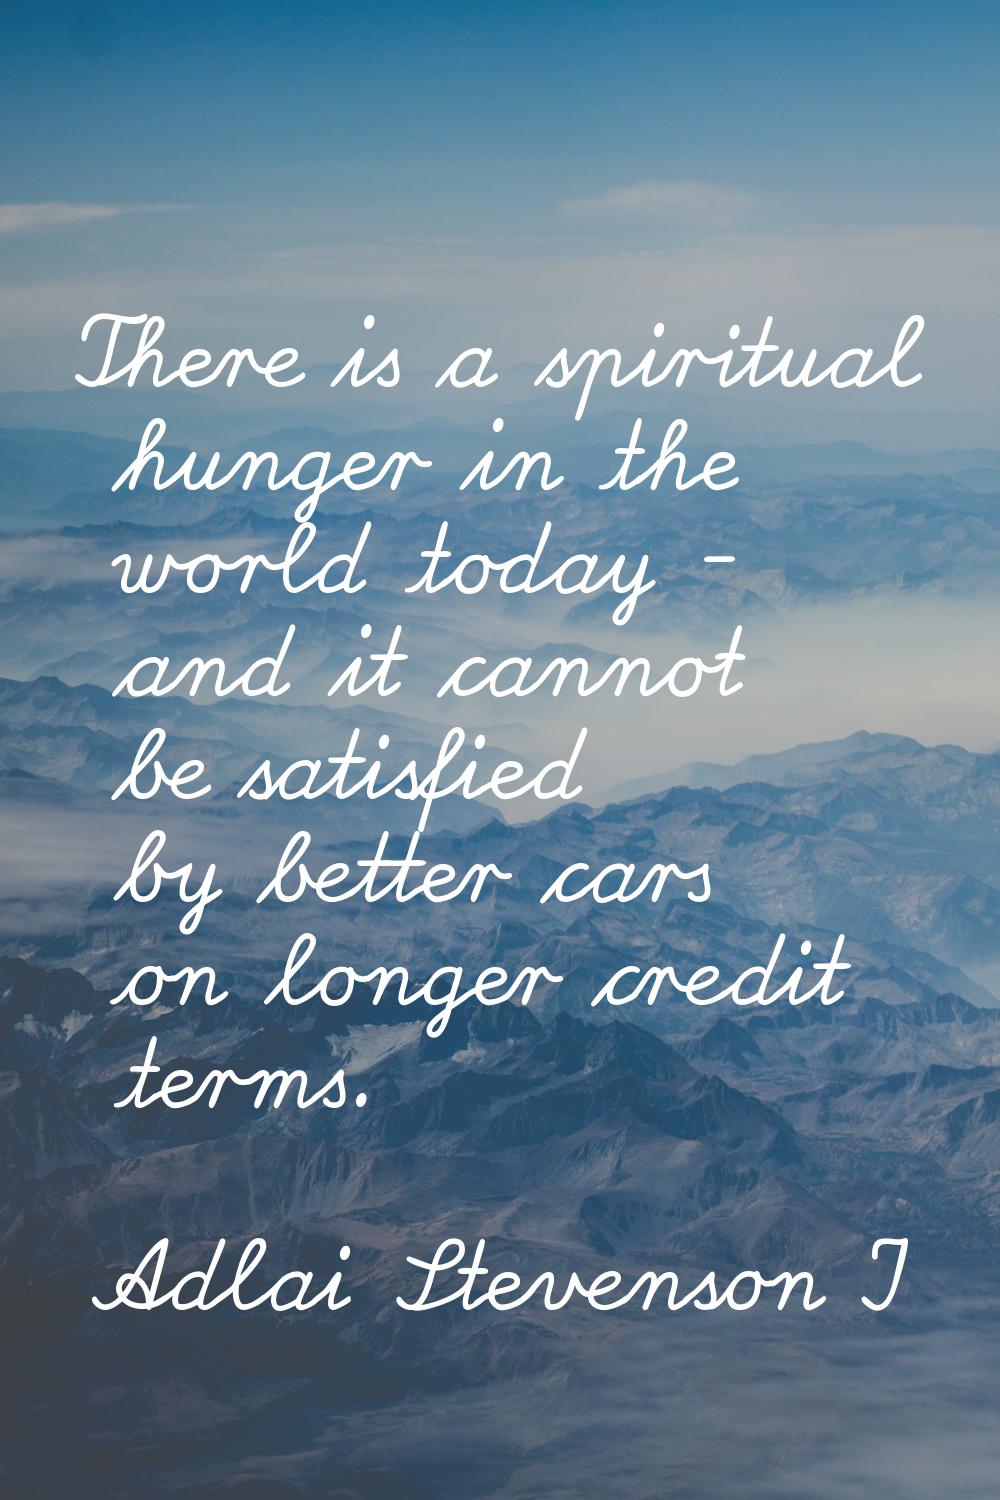 There is a spiritual hunger in the world today - and it cannot be satisfied by better cars on longe